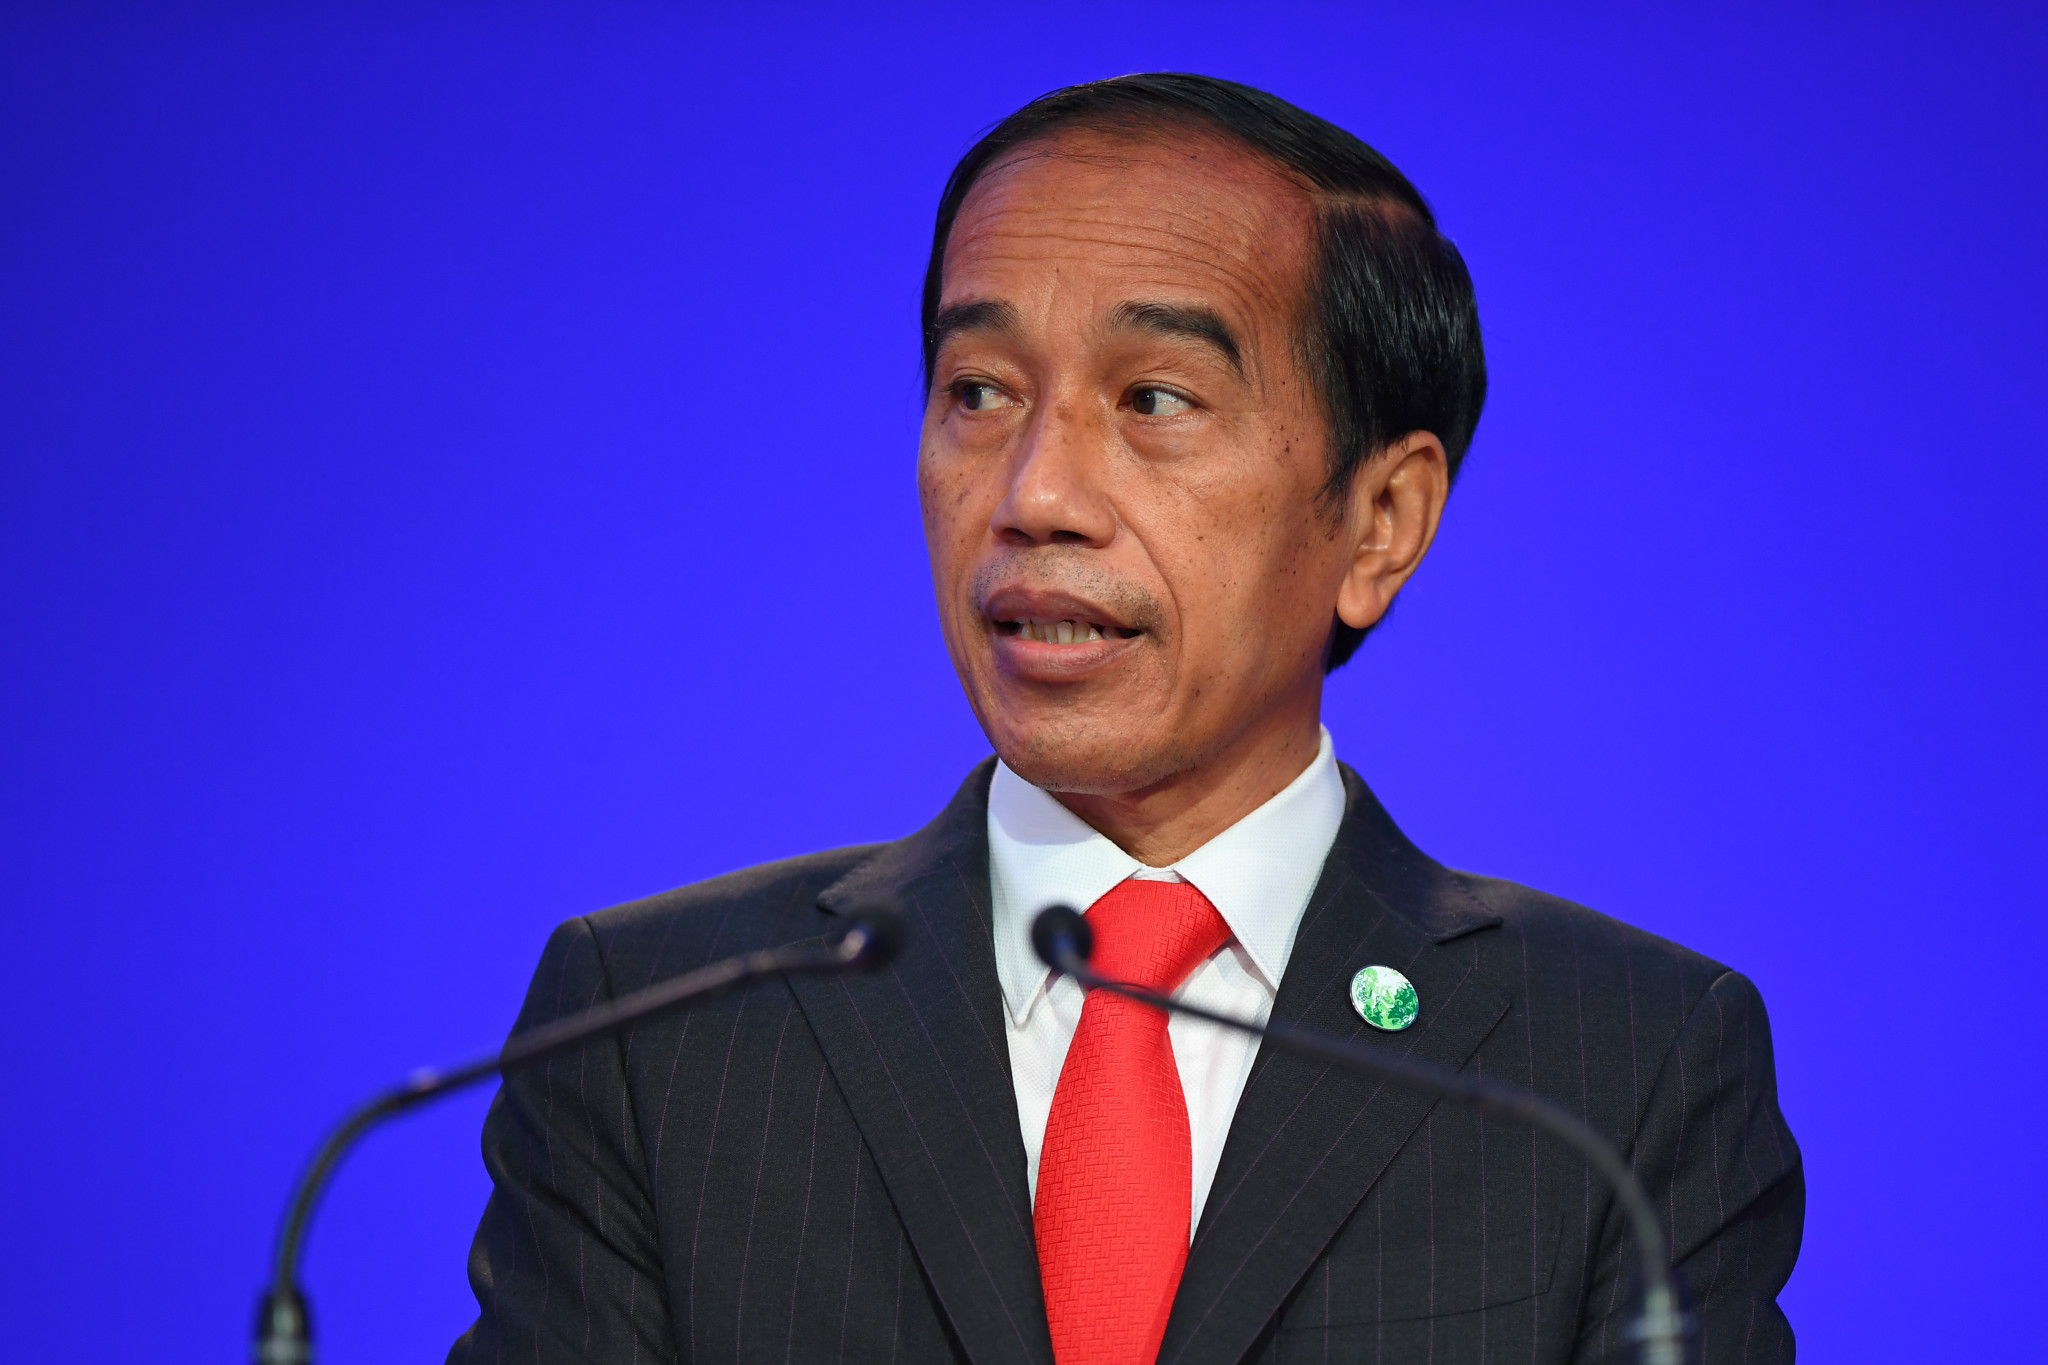 KOI awaits approval from President Widodo for next stage of ANOC World Beach Games preparation